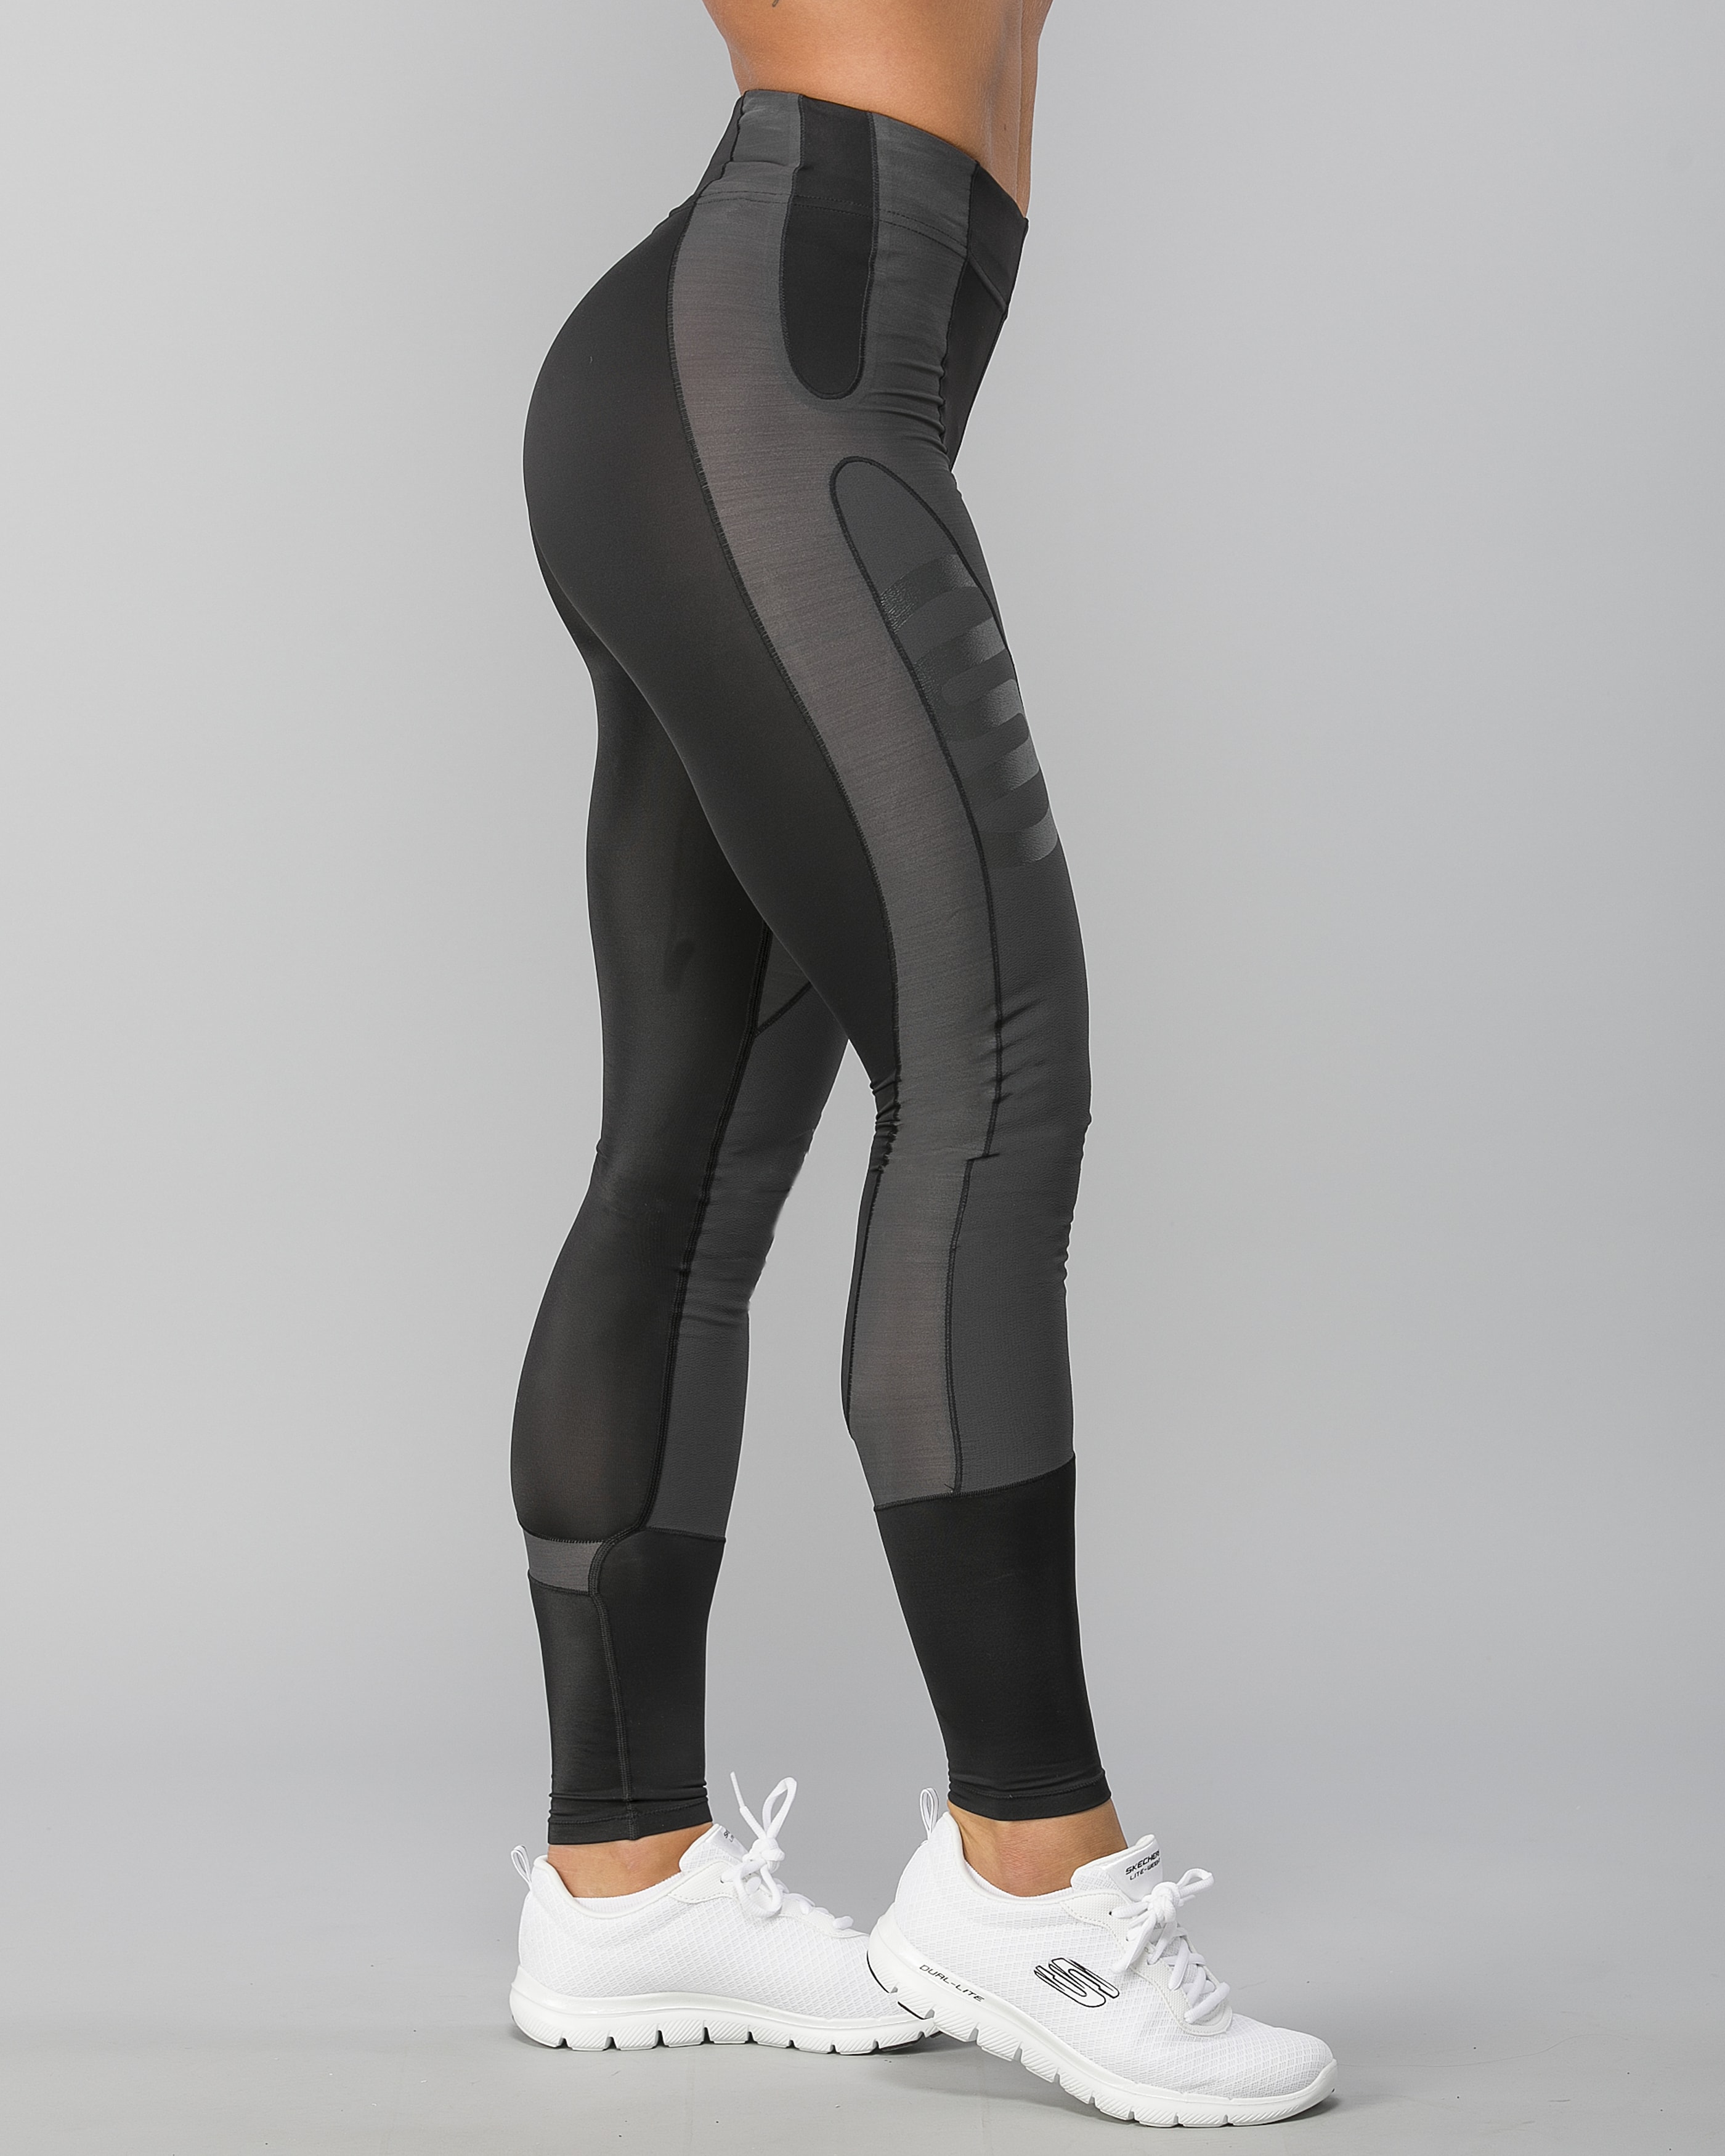 Review: SKINS K-PROPRIUM Compression Tights